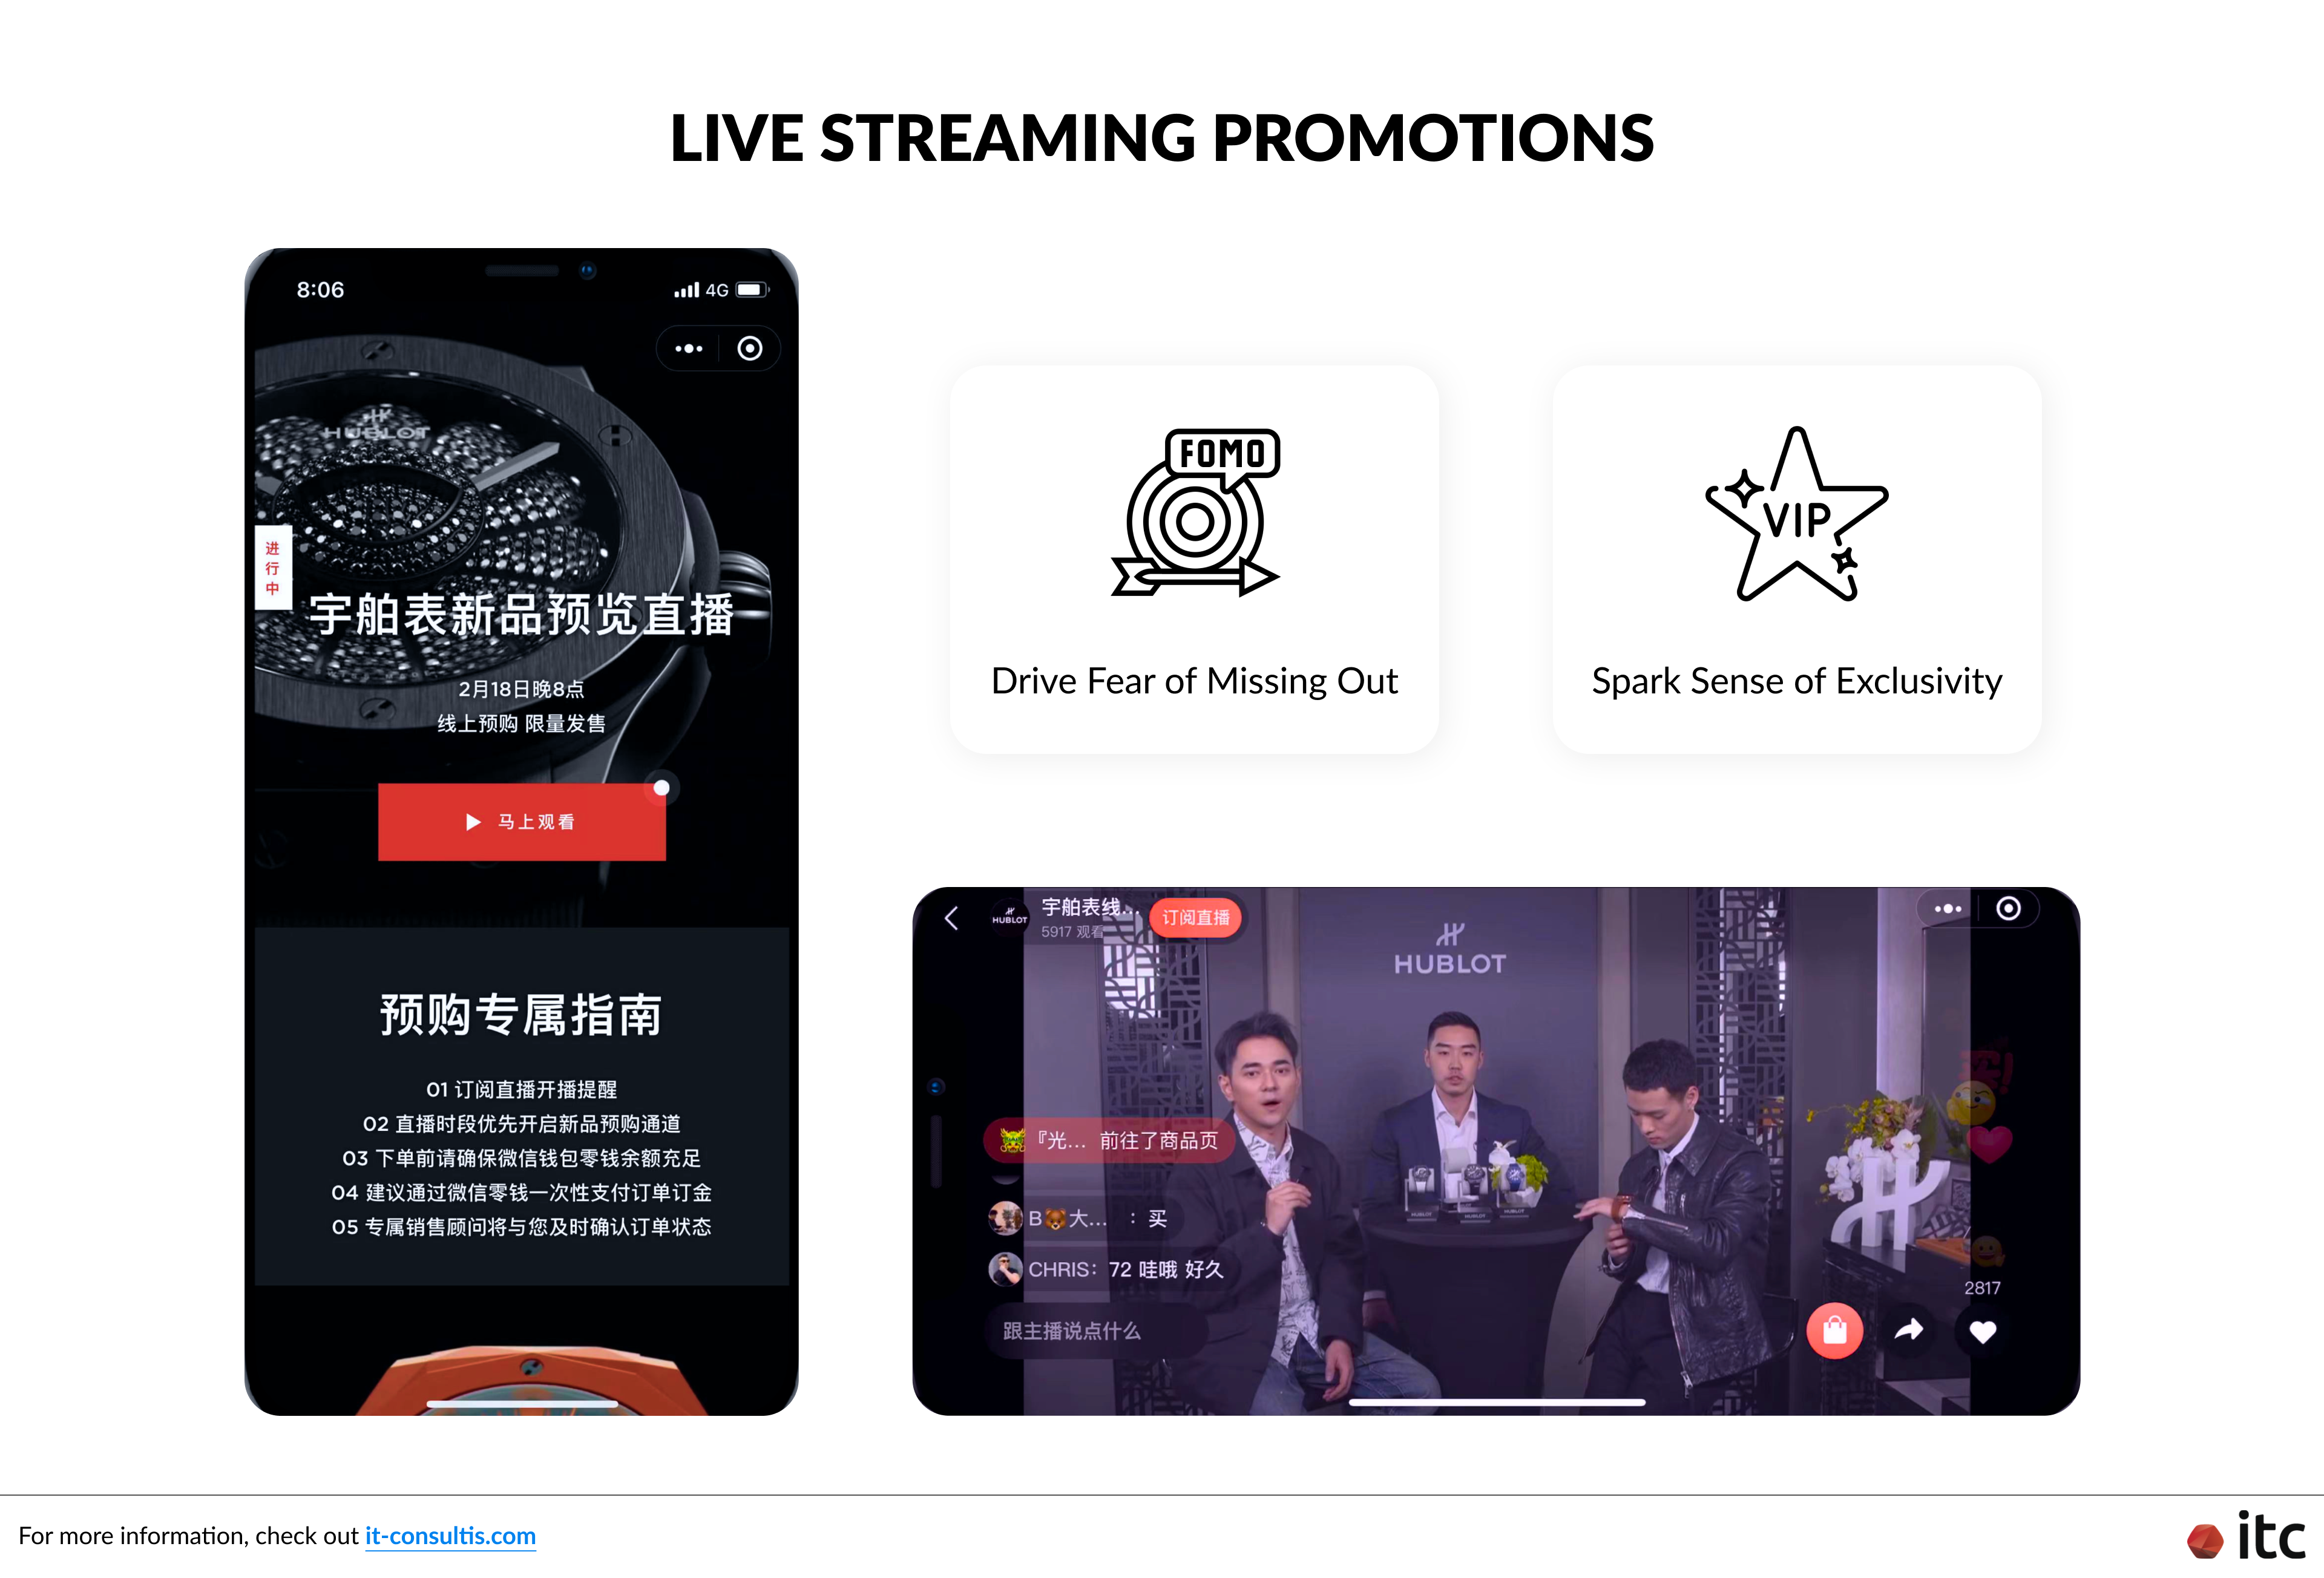 Hublot also leveraged live streaming promotions to drive Fear of Missing Out (FOMO) and spark a sense of exclusivity among users